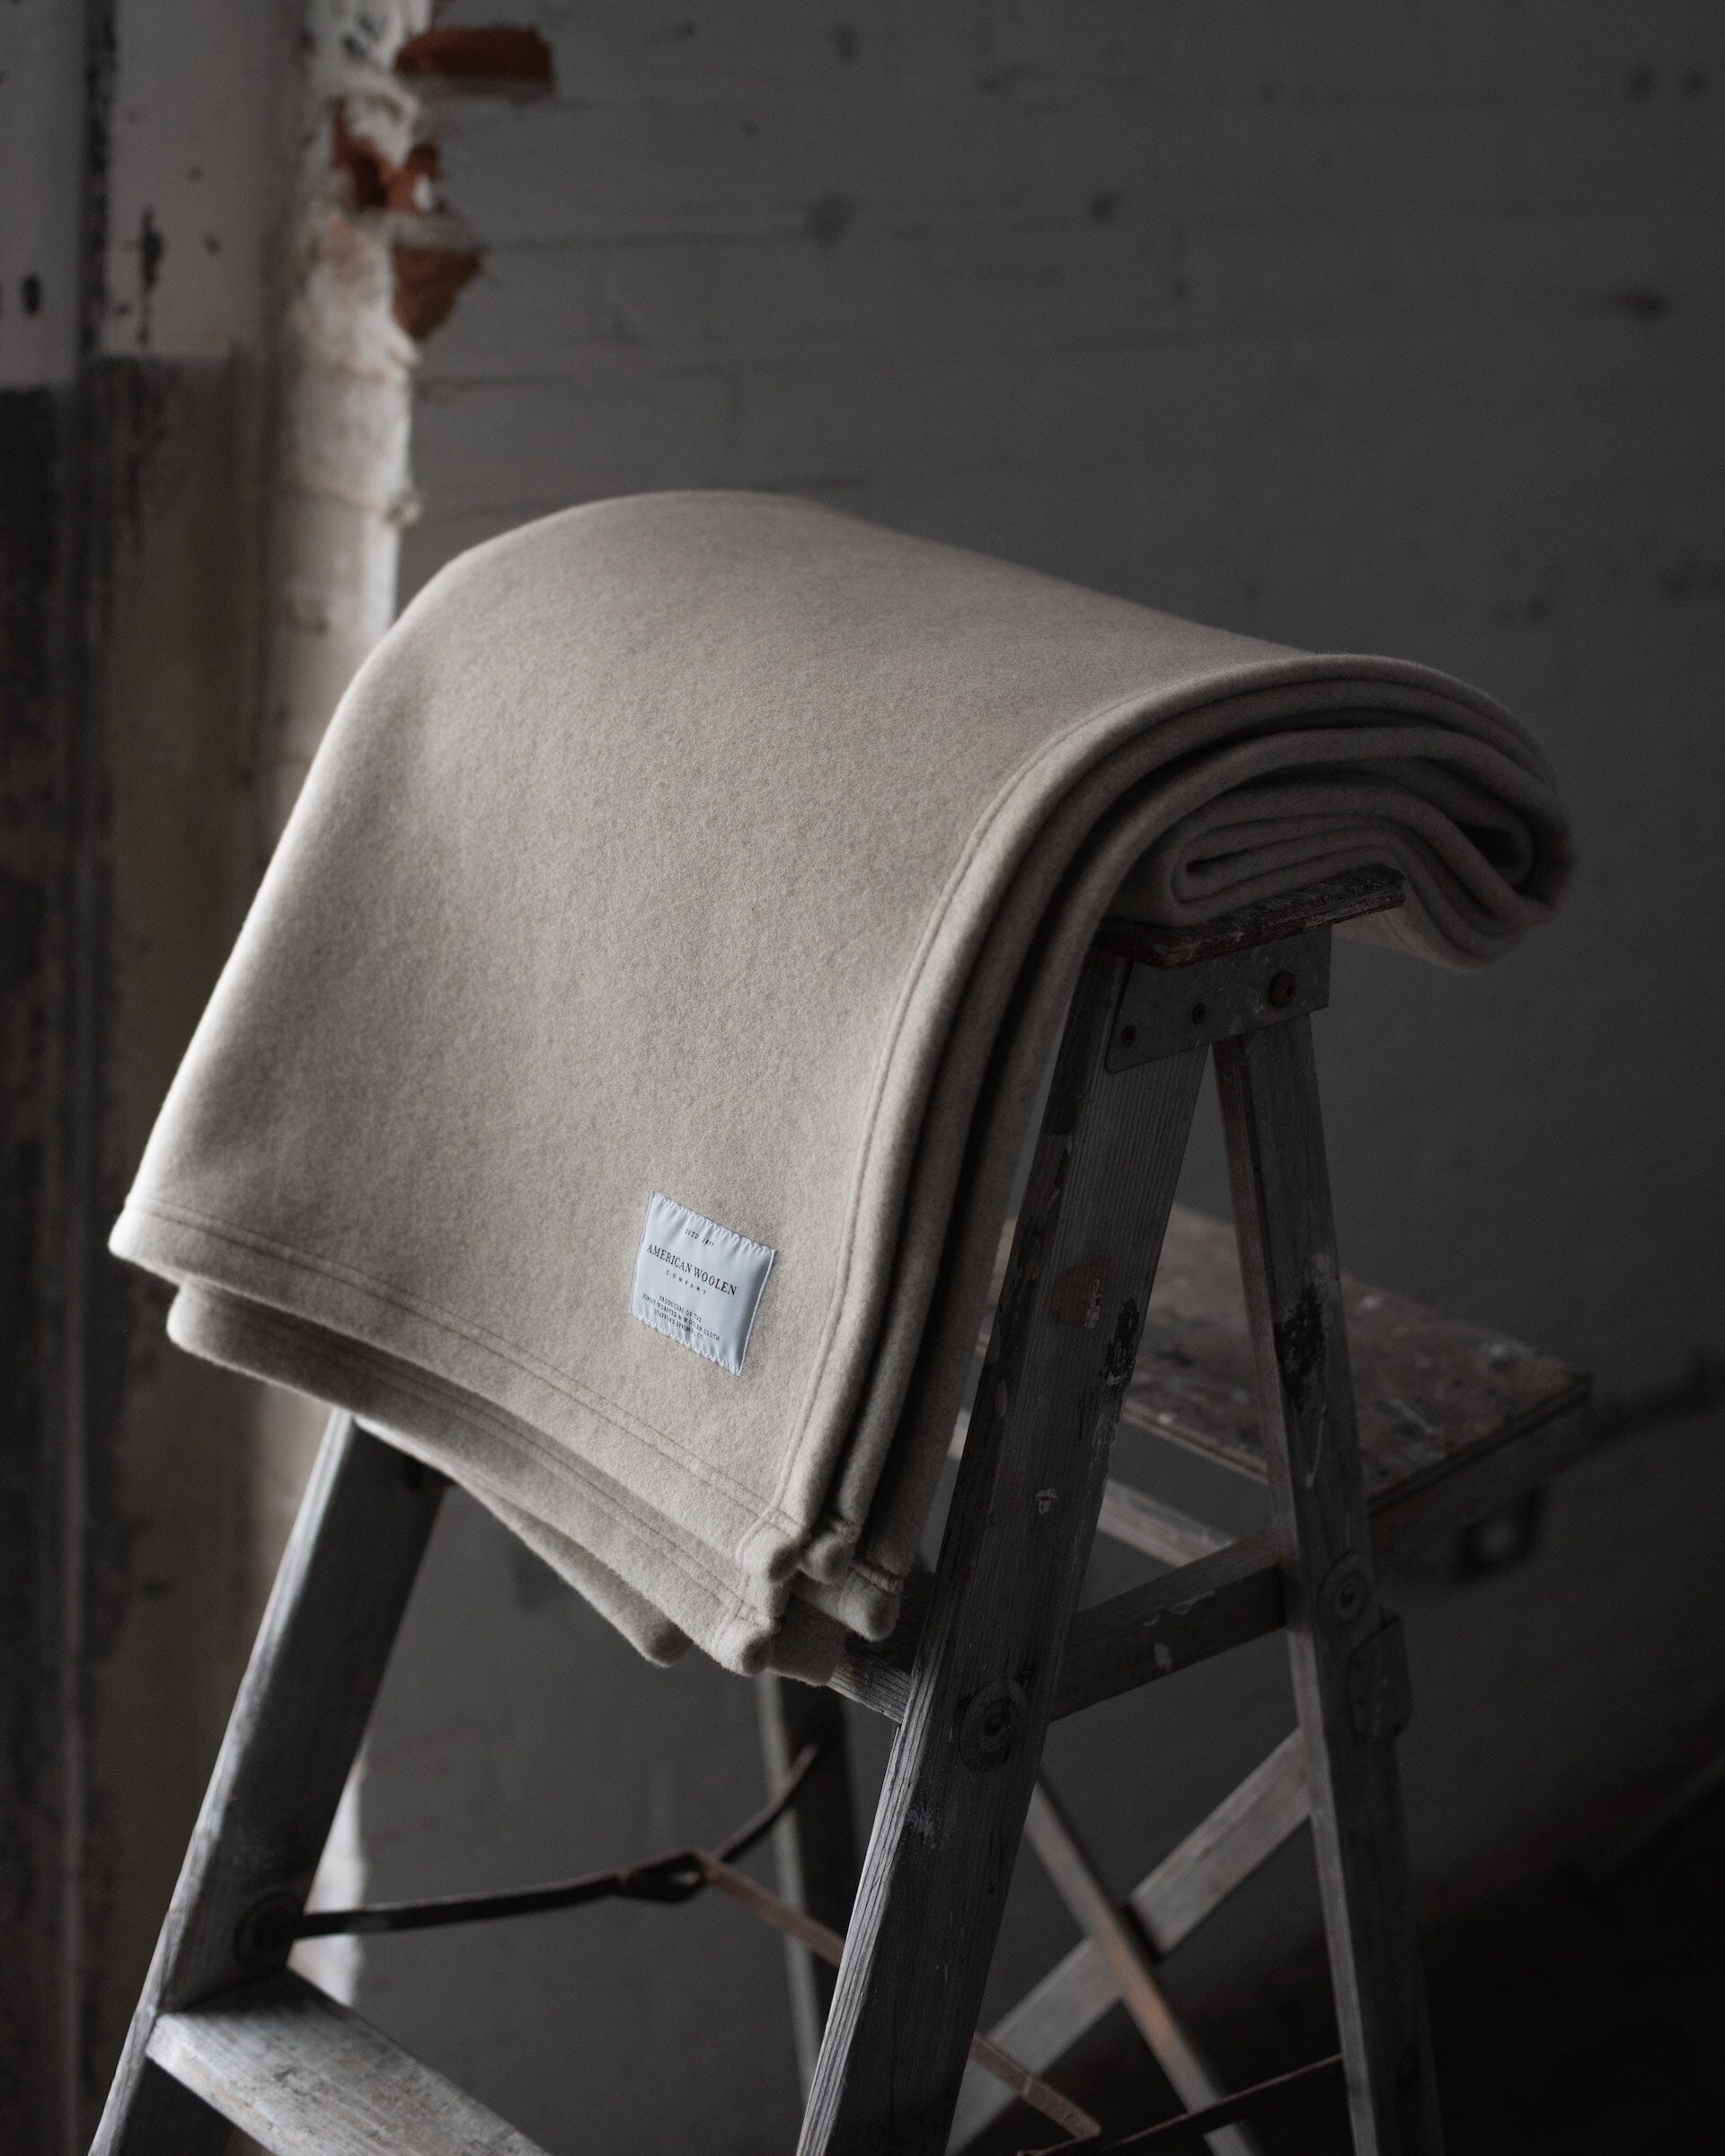 The Wool Cashmere Blanket